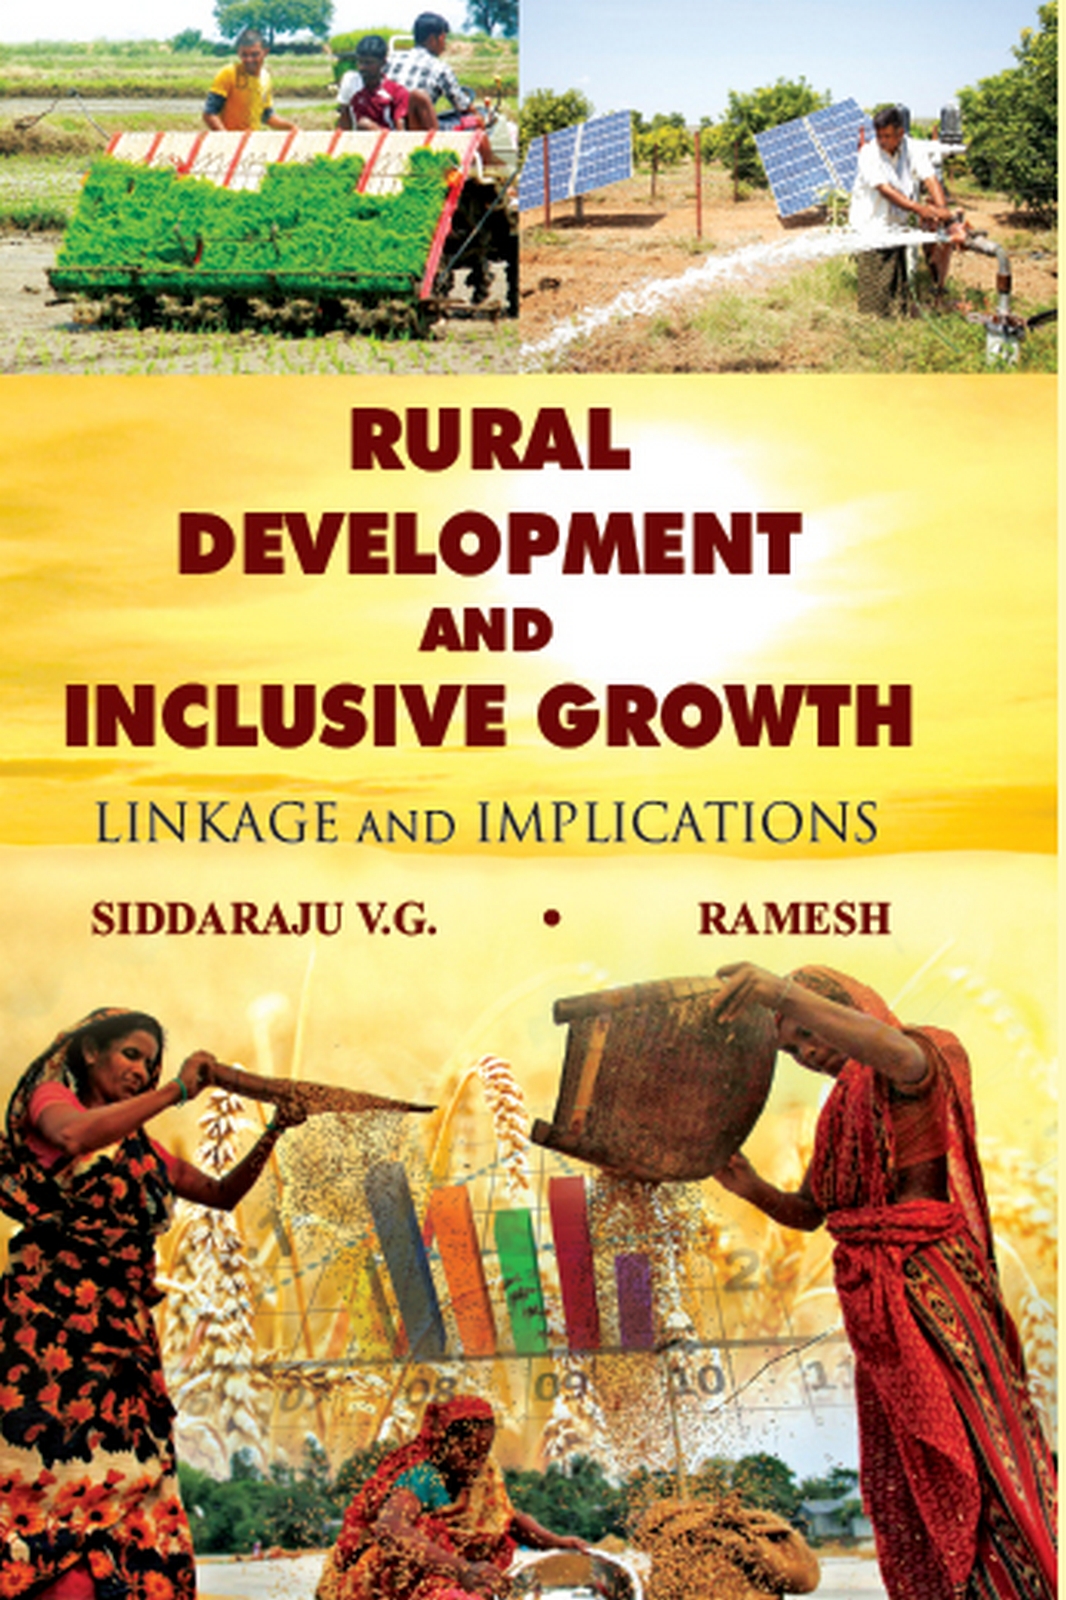 Rural Development And Inclusive Growth Linkage And Implications